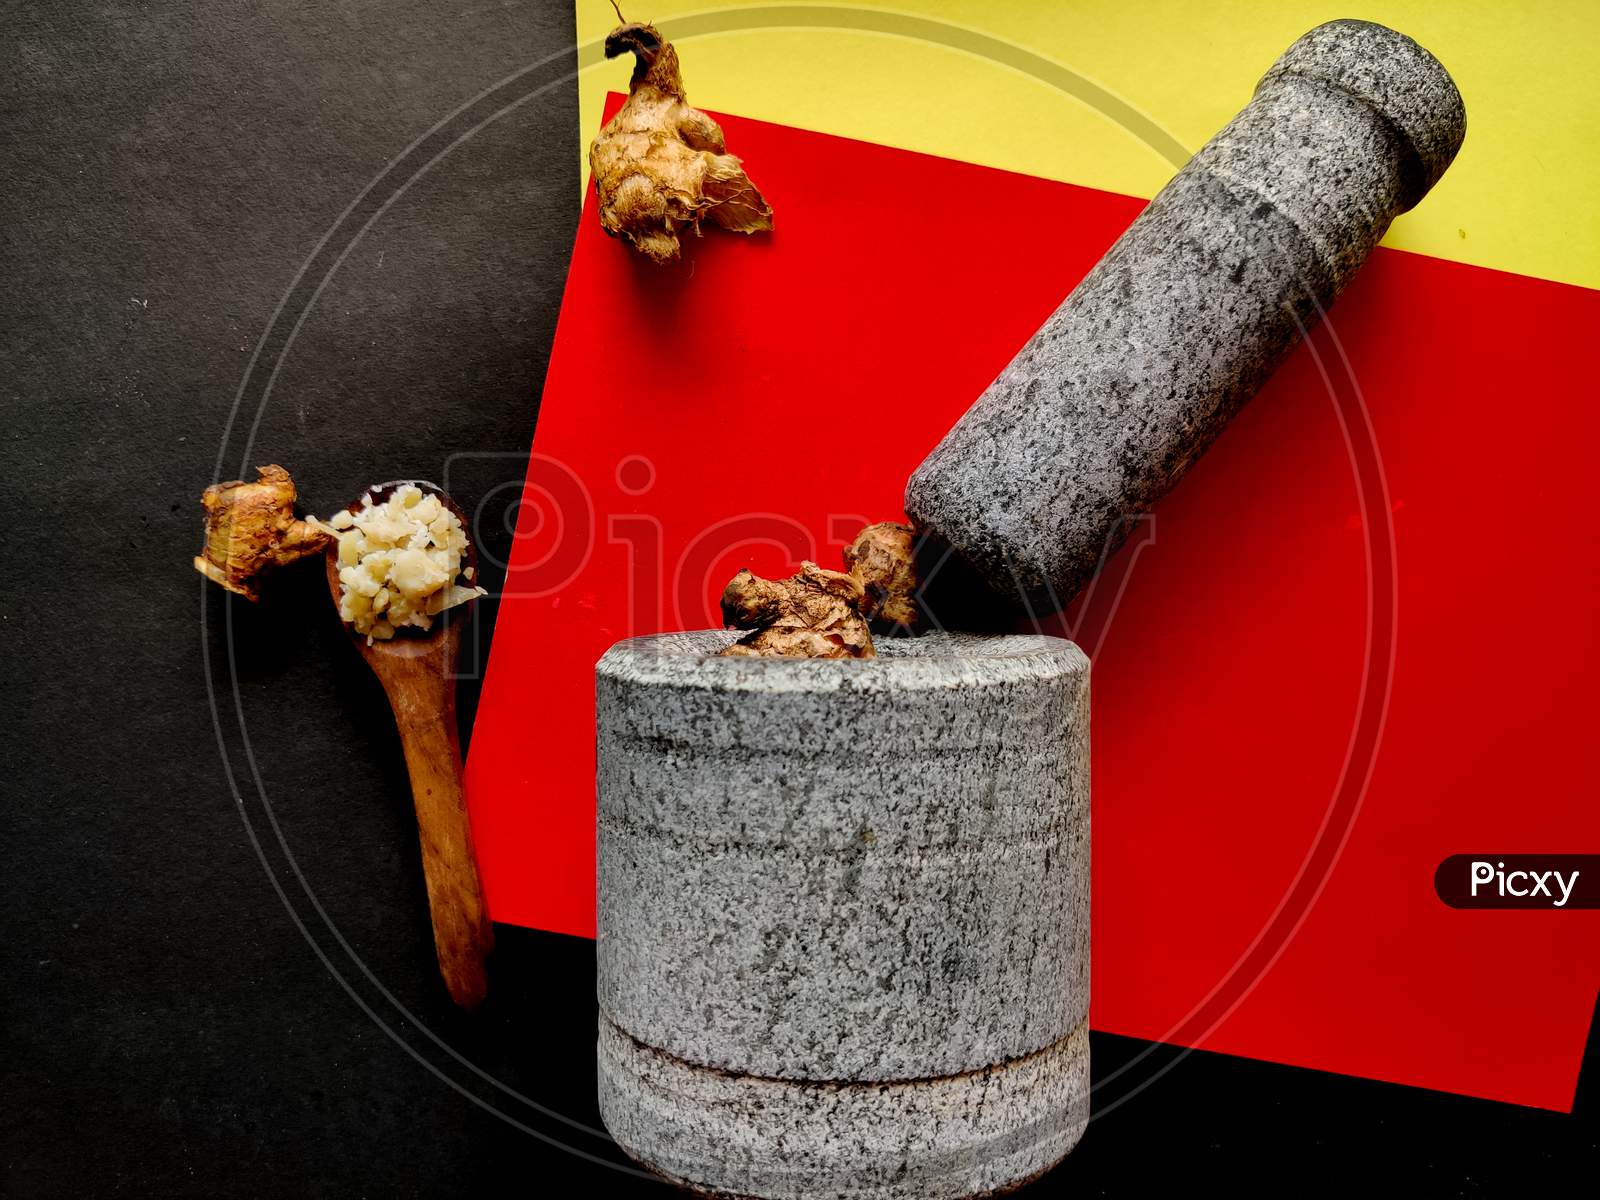 Stone Made Of Mortar And Pestle Is Ready To Crush The Gingers. Isolated On Red, Yellow And Black Background.